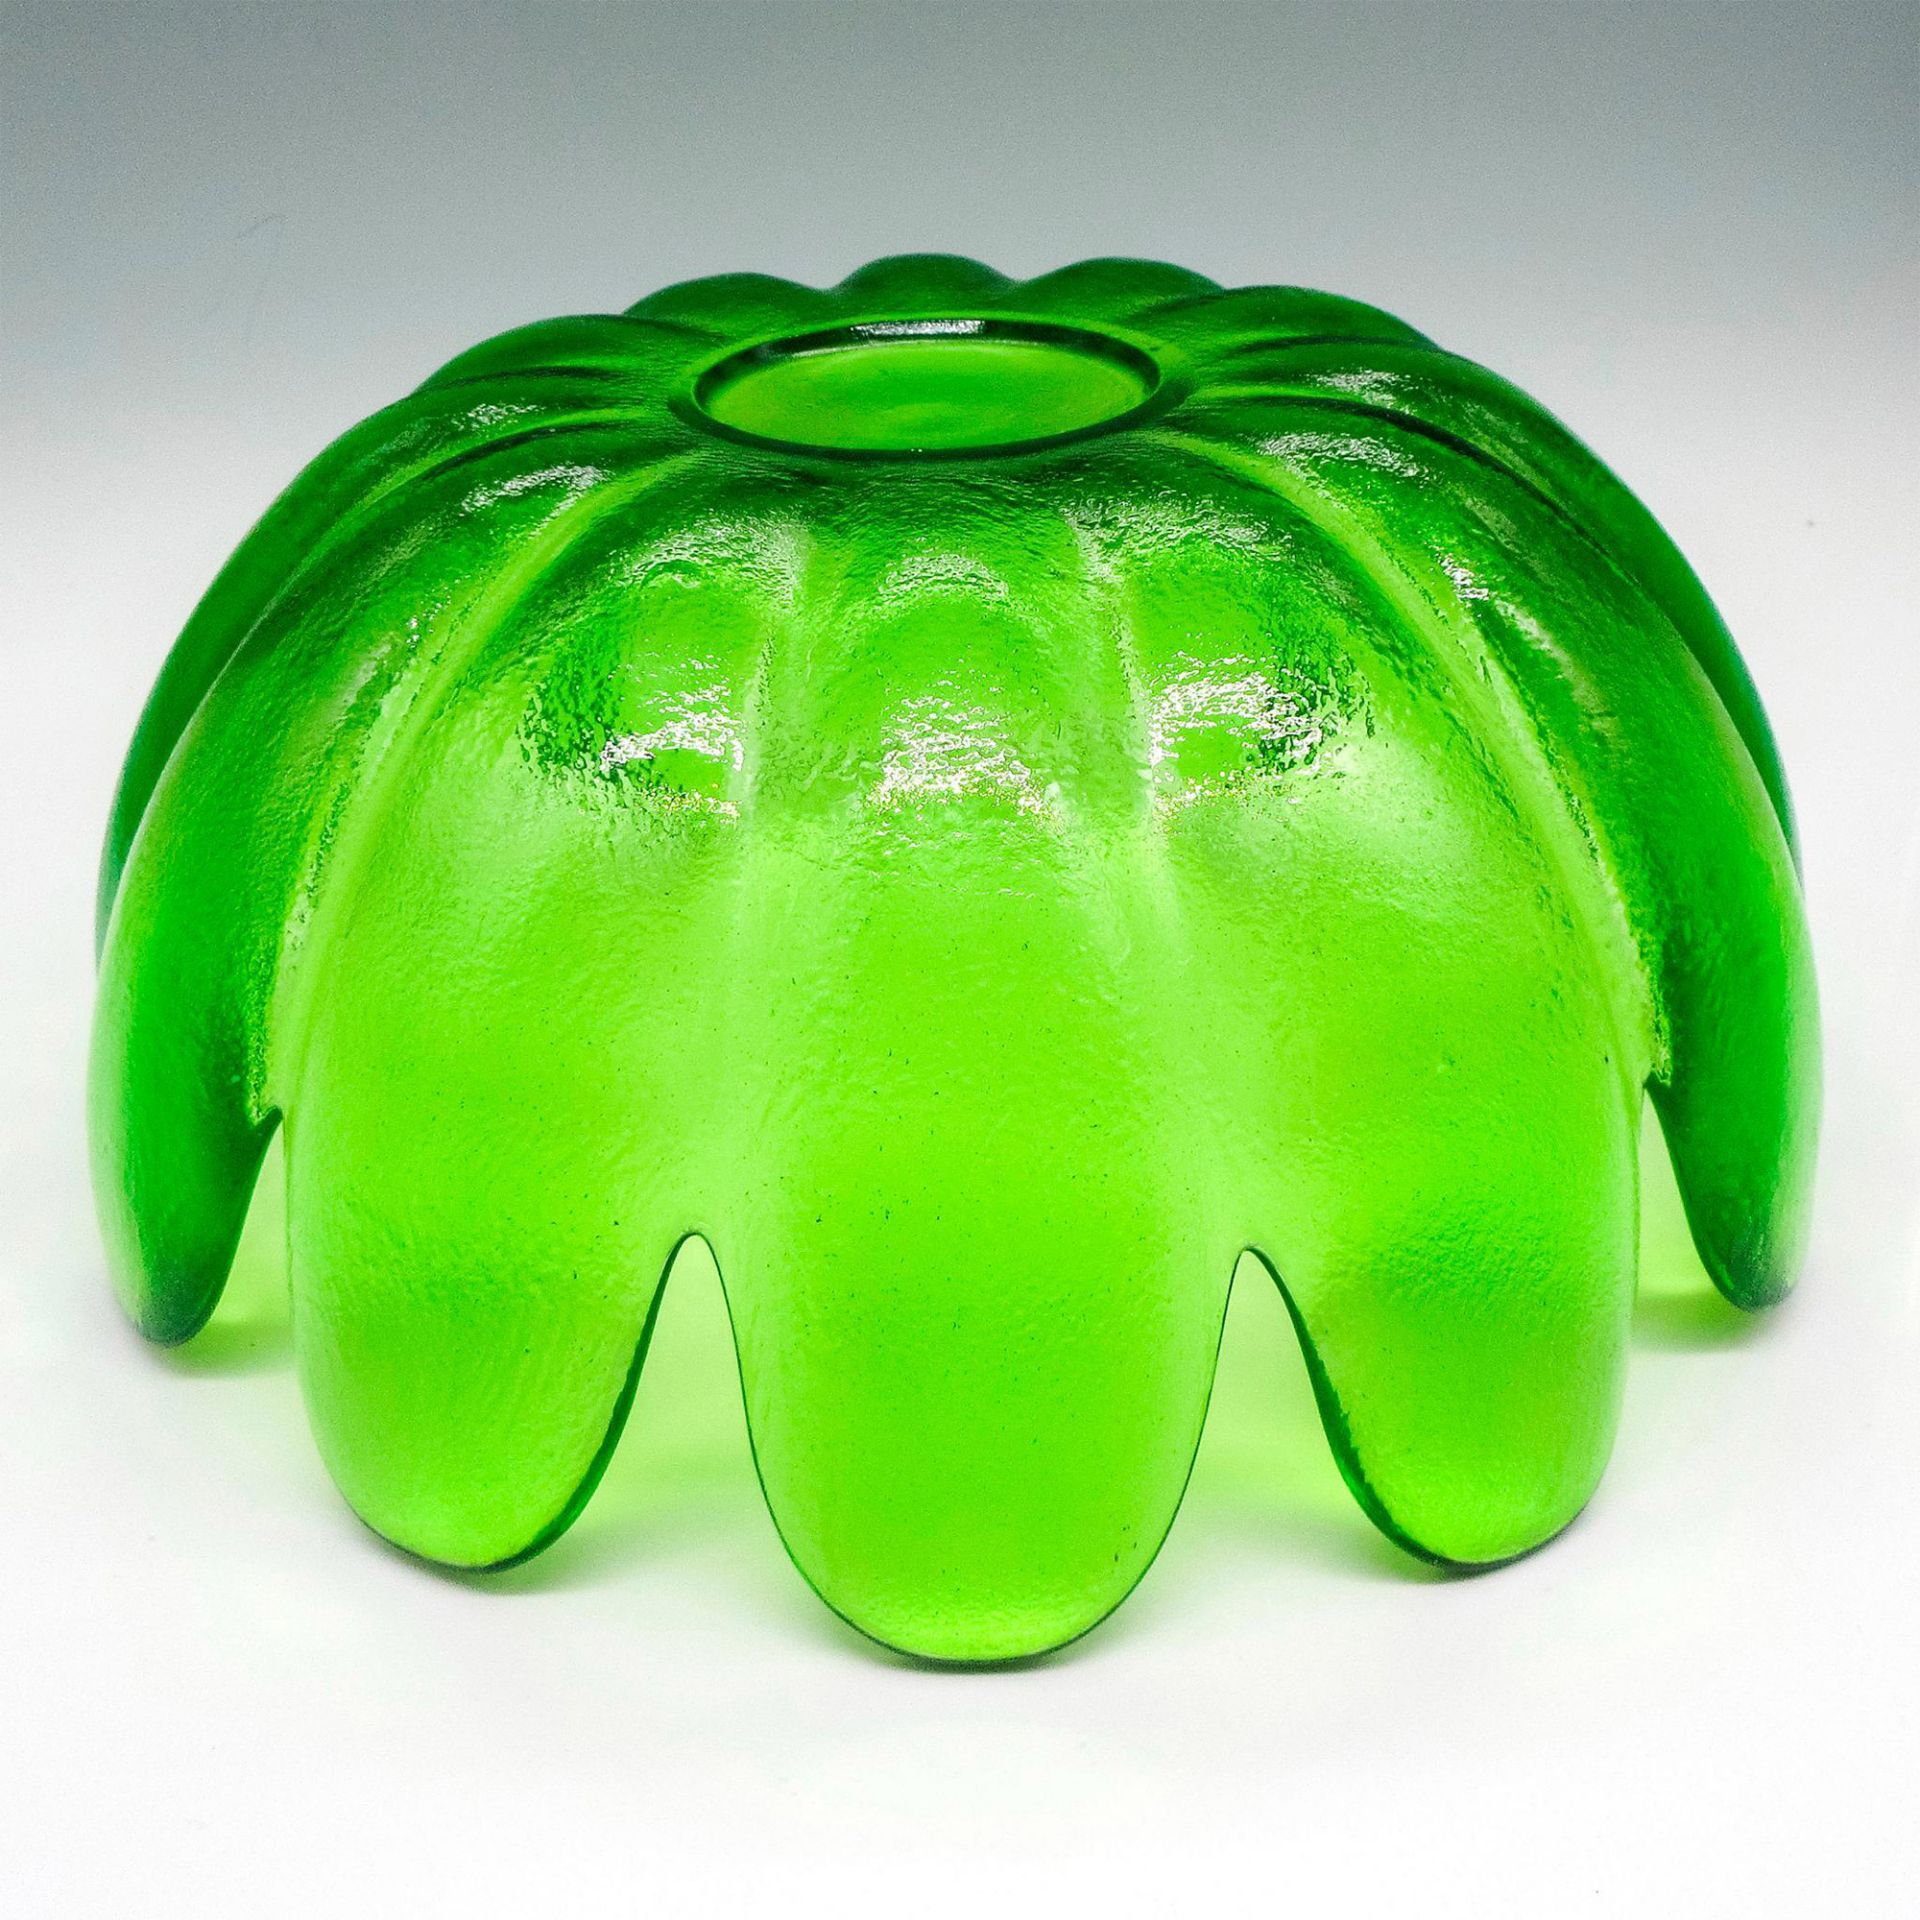 Vintage Indiana Green Glass Bowl - Image 3 of 3